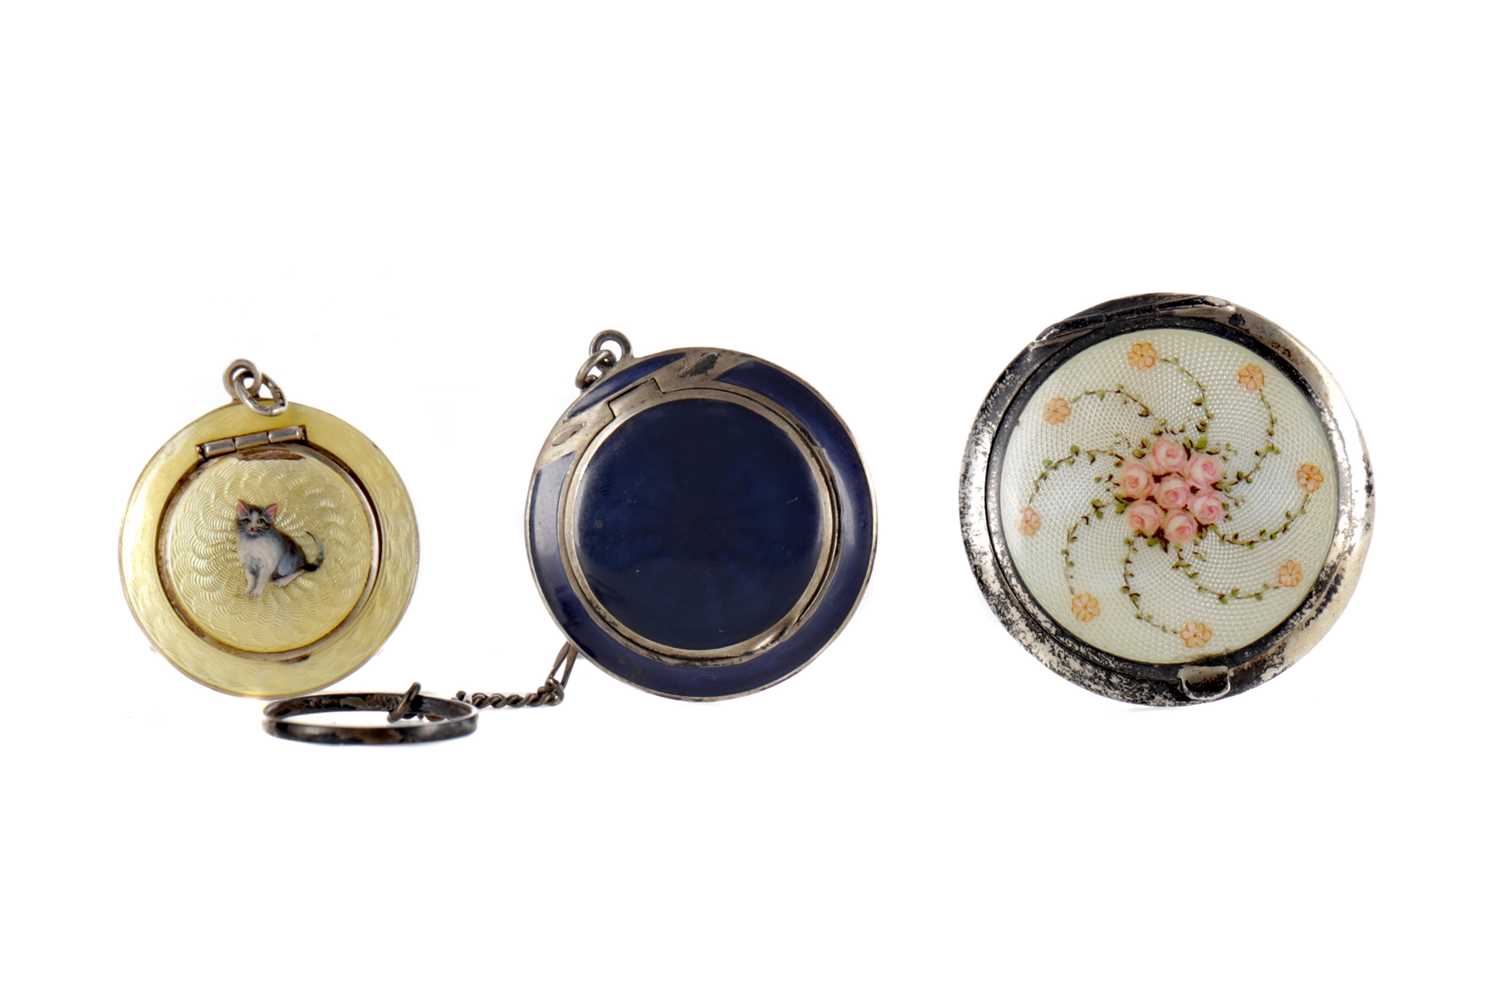 Lot 1708 - A CHARMING GUILLOCHE ENAMEL COMPACT AND TWO OTHERS